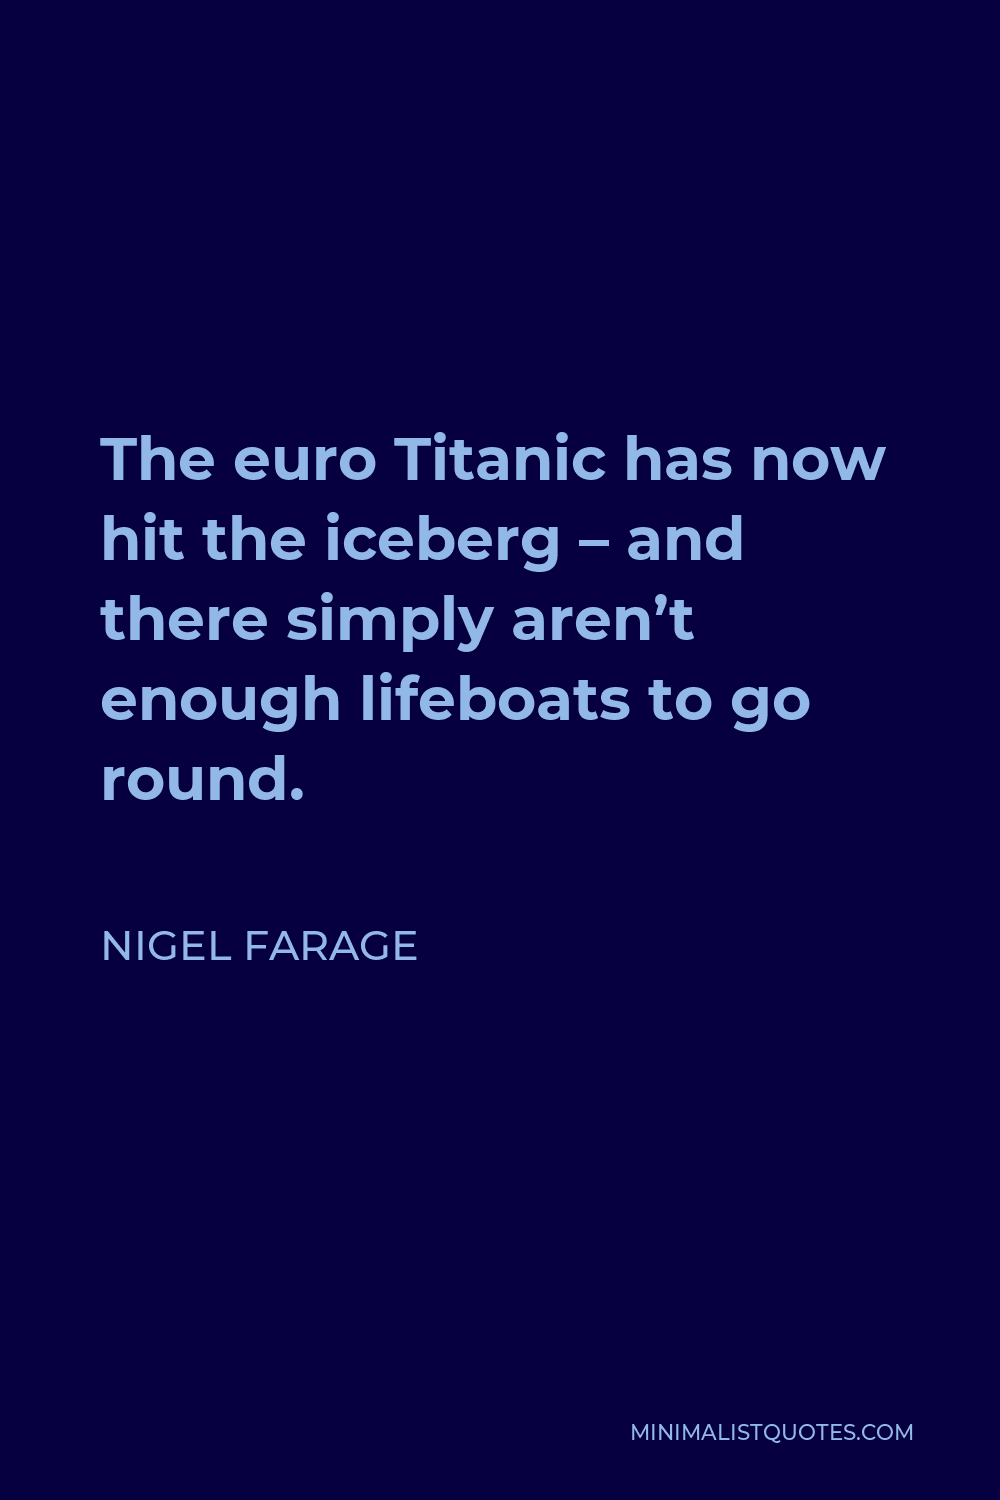 Nigel Farage Quote - The euro Titanic has now hit the iceberg – and there simply aren’t enough lifeboats to go round.